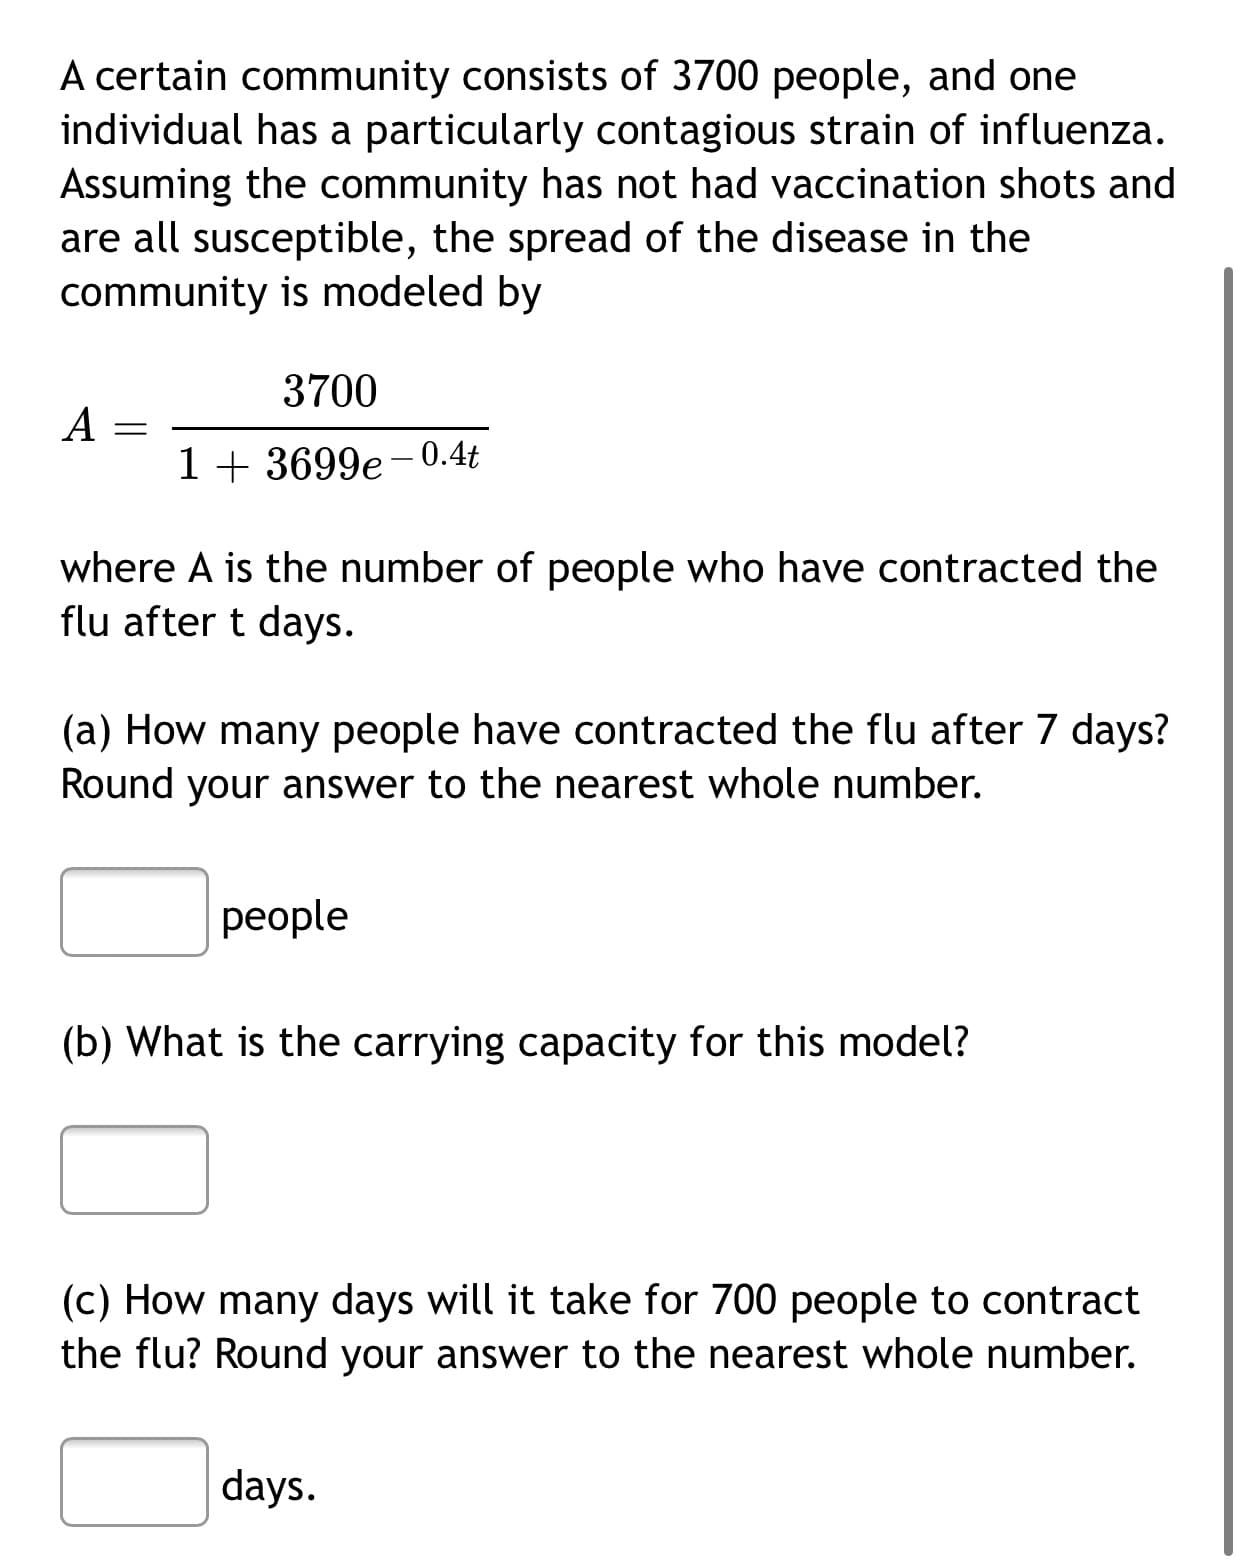 A certain community consists of 3700 people, and one
individual has a particularly contagious strain of influenza.
Assuming the community has not had vaccination shots and
are all susceptible, the spread of the disease in the
community is modeled by
3700
A
1+ 3699e-0.4t
where A is the number of people who have contracted the
flu after t days.
(a) How many people have contracted the flu after 7 days?
Round your answer to the nearest whole number.
реople
(b) What is the carrying capacity for this model?
(c) How many days will it take for 700 people to contract
the flu? Round your answer to the nearest whole number.
days.
